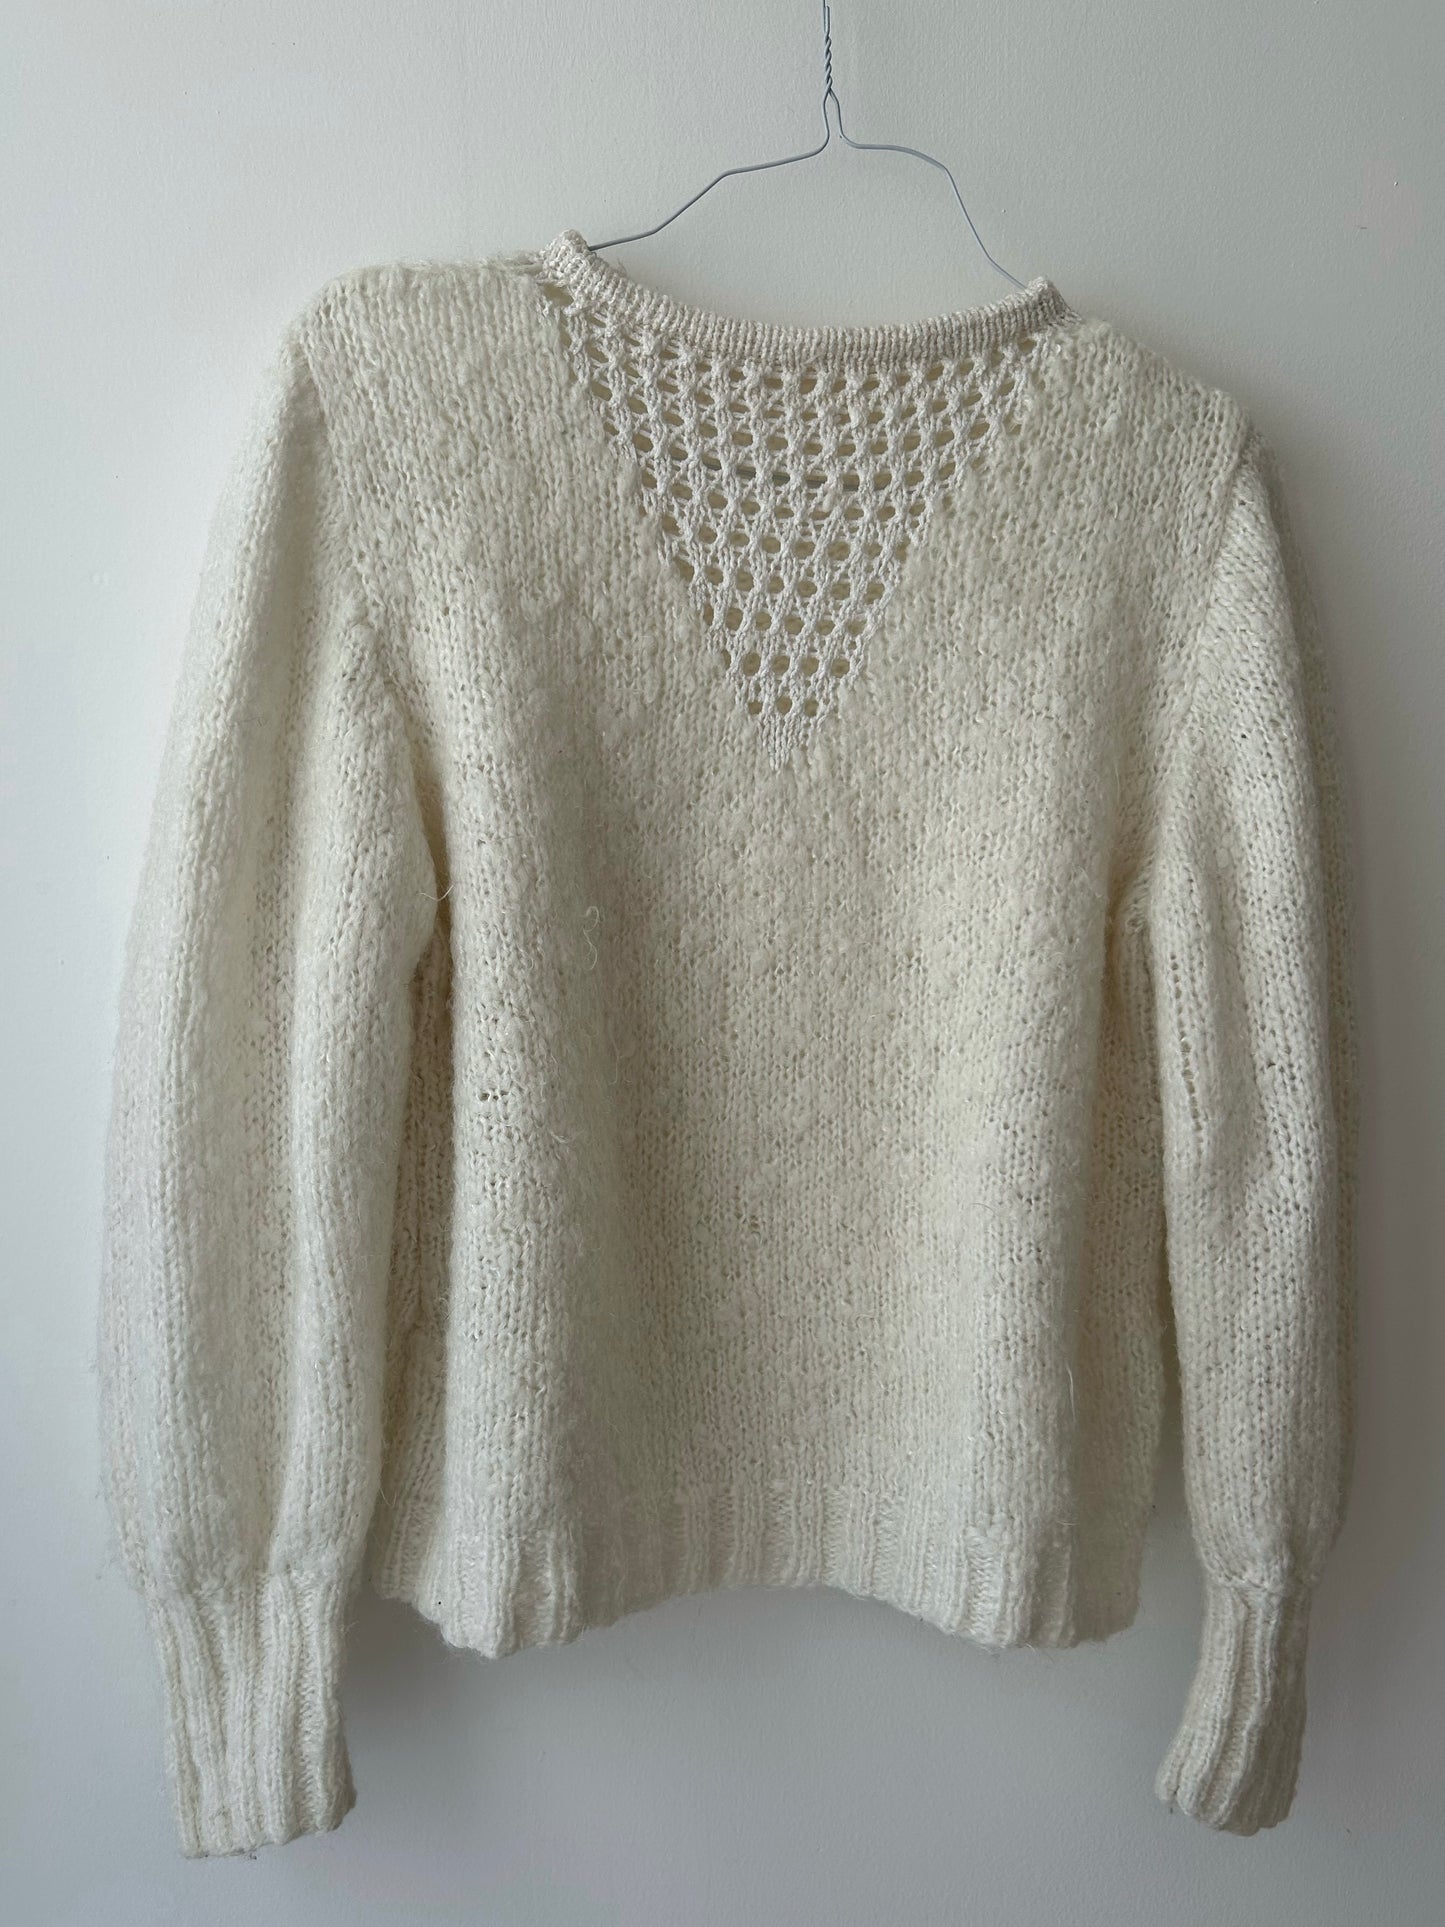 Handmade knitted sweater with holes